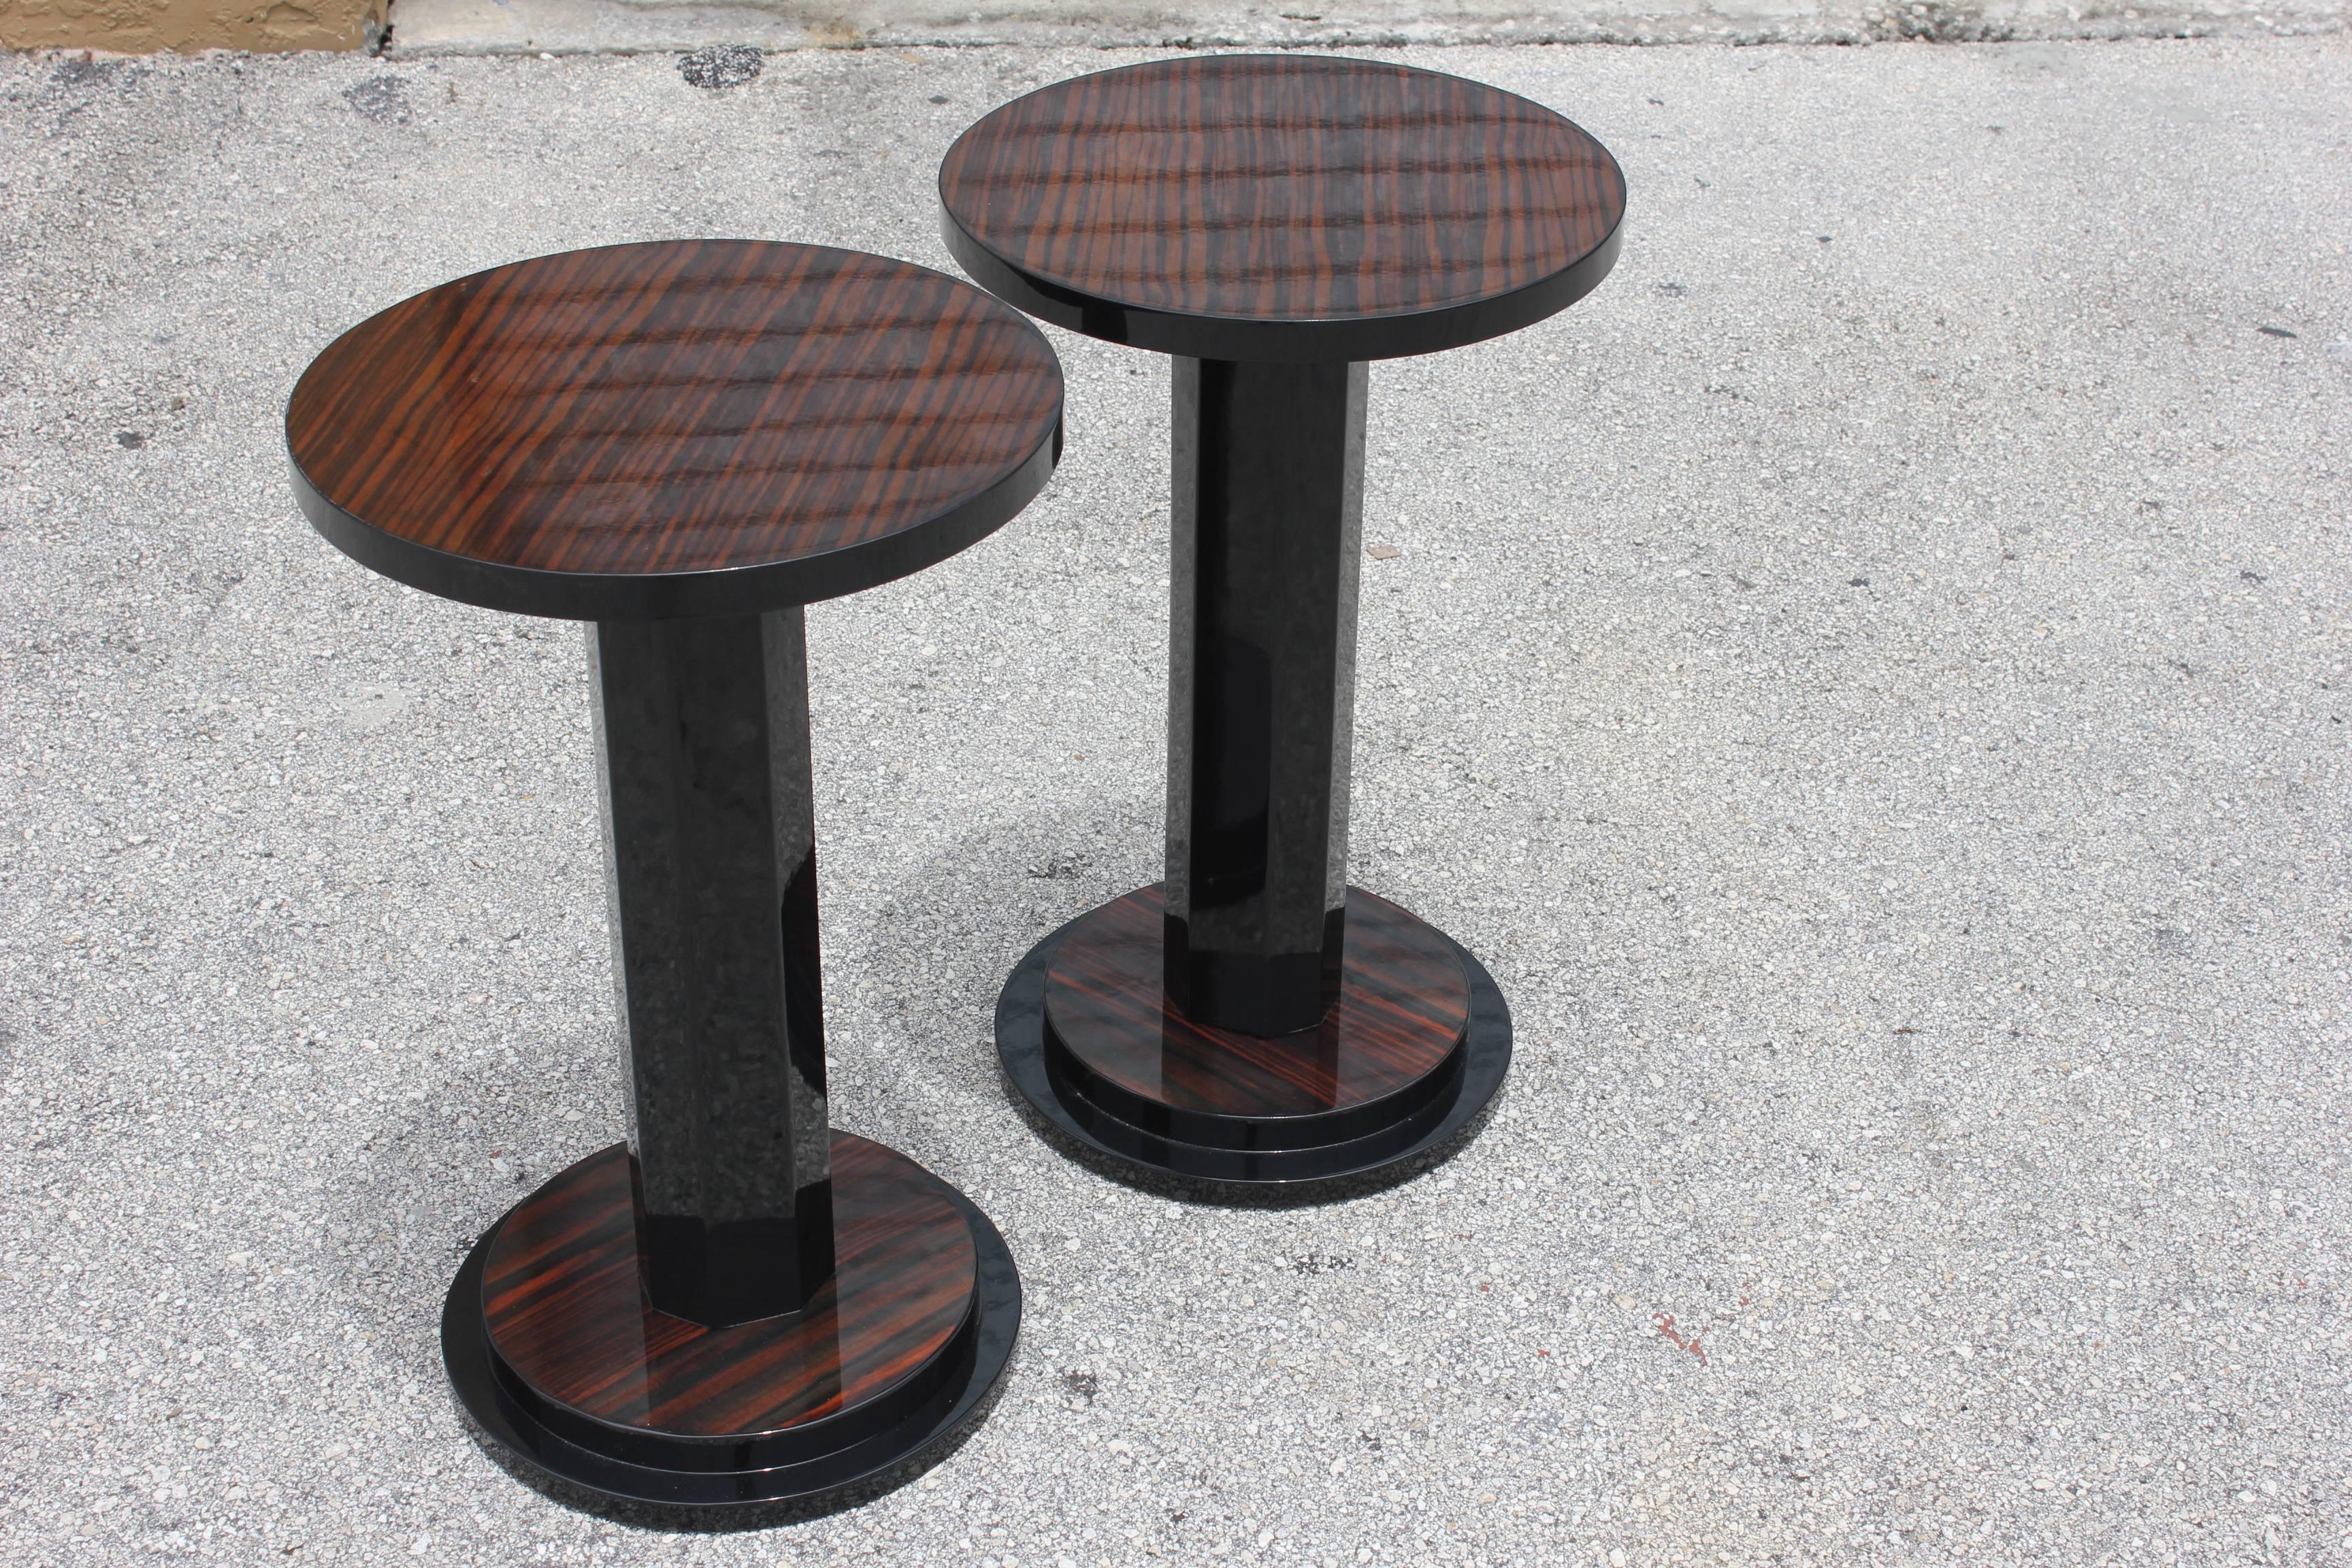 A pair of French Art Deco exotic Macassar ebony end tables, circa 1940s. Black lacquered center columns and accents. Two-tiered bases. Newly refinished and lacquered. We acquired five pairs of these tables from the lounge of a French hotel. There